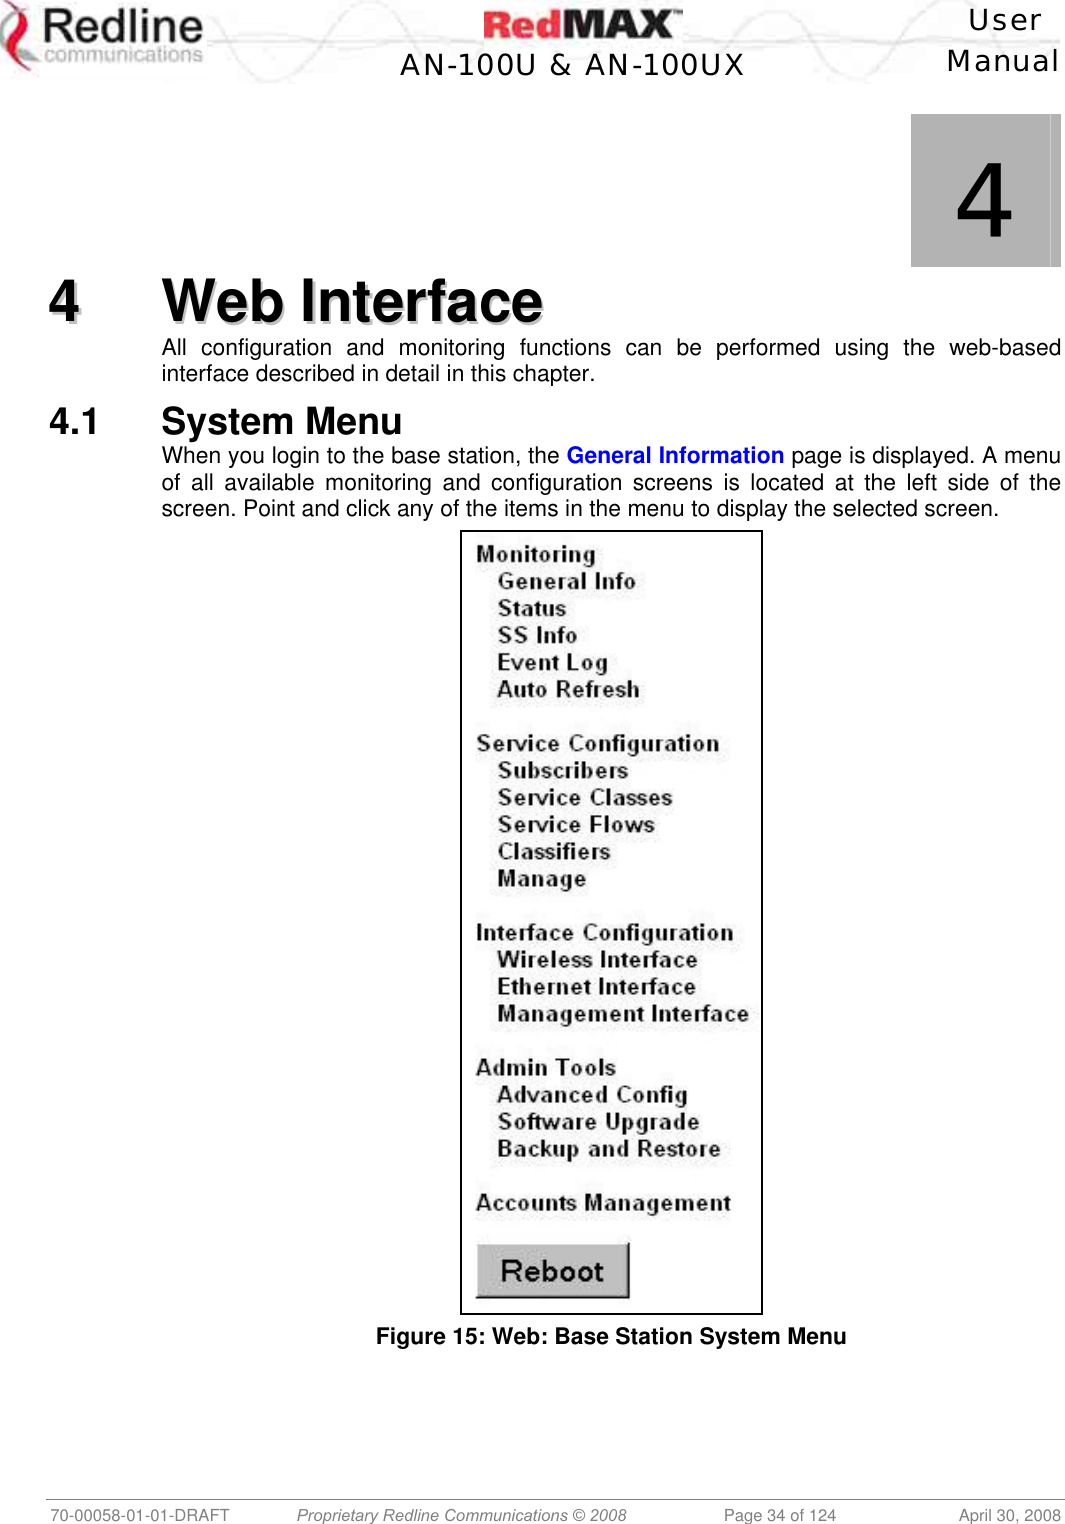    User  AN-100U &amp; AN-100UX Manual   70-00058-01-01-DRAFT  Proprietary Redline Communications © 2008   Page 34 of 124  April 30, 2008             4 44  WWeebb  IInntteerrffaaccee  All configuration and monitoring functions can be performed using the web-based interface described in detail in this chapter. 4.1 System Menu When you login to the base station, the General Information page is displayed. A menu of all available monitoring and configuration screens is located at the left side of the screen. Point and click any of the items in the menu to display the selected screen.  Figure 15: Web: Base Station System Menu 